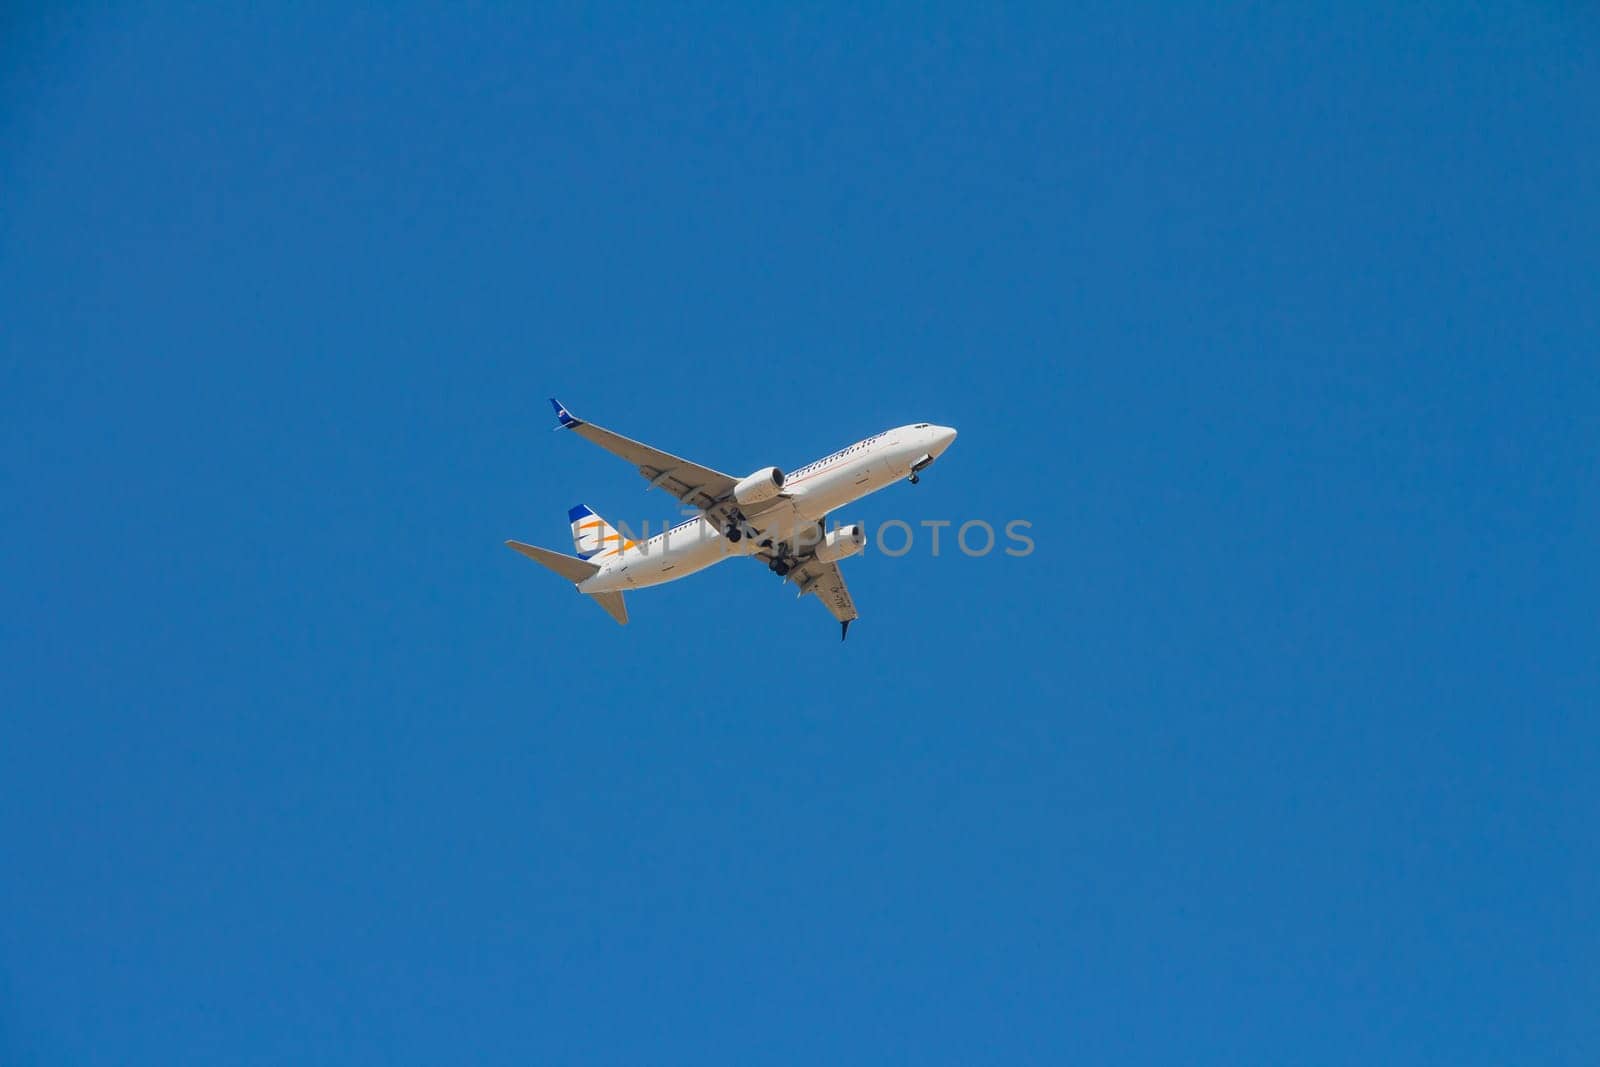 Tel aviv, Israel - October 7, 2017: SmartWings airline commercial plane flying in the blue sky going for a landing. SmartWings is a brand of the Czech Travel Service Airlines.